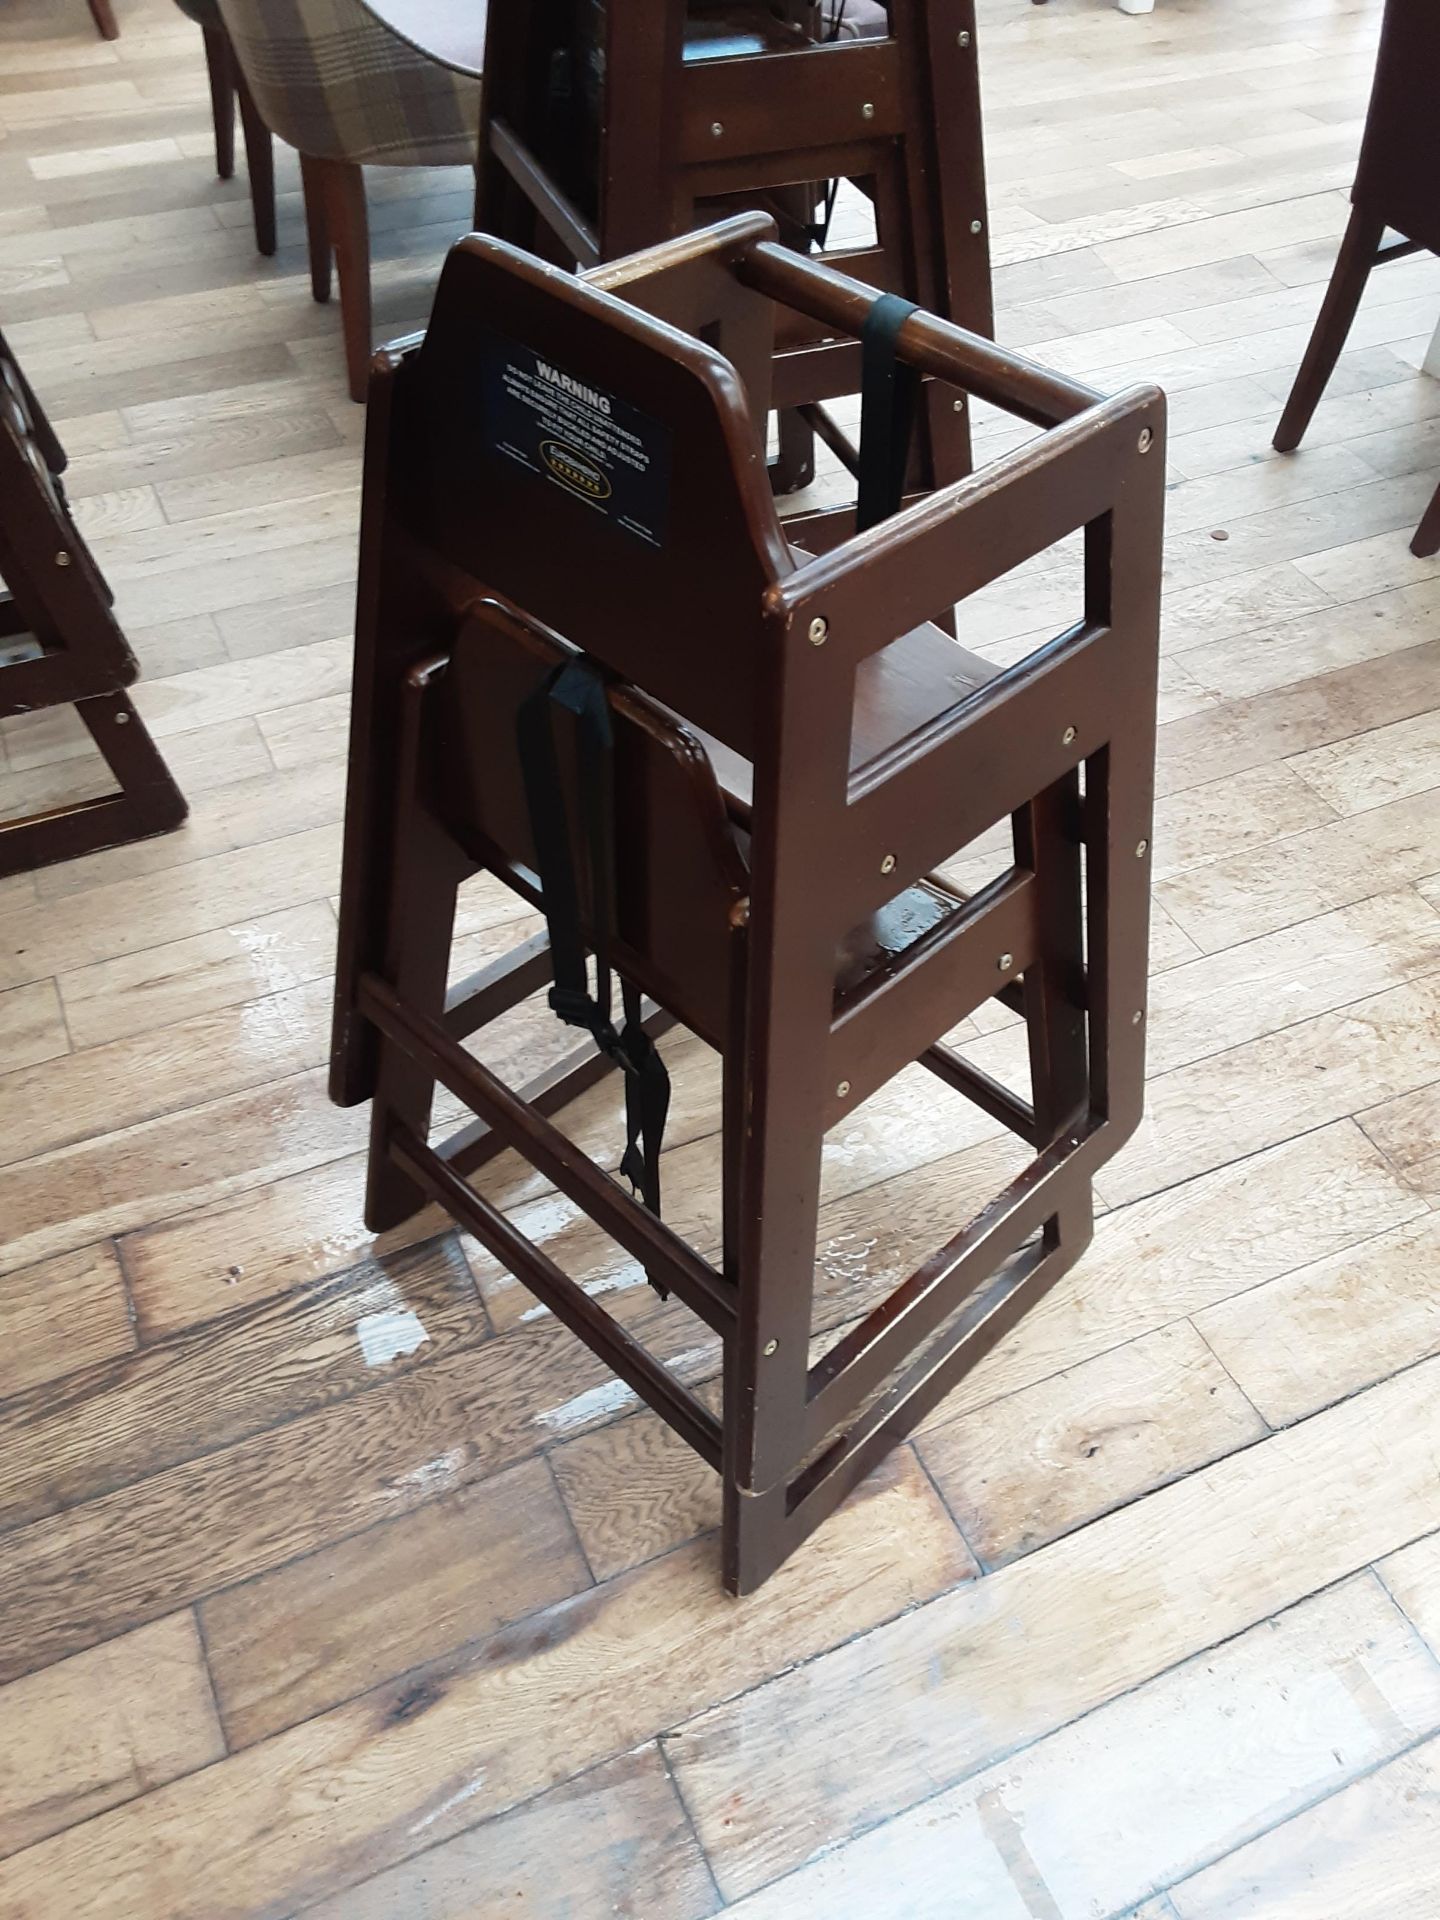 2x Children Wooden High Chairs - Image 2 of 4